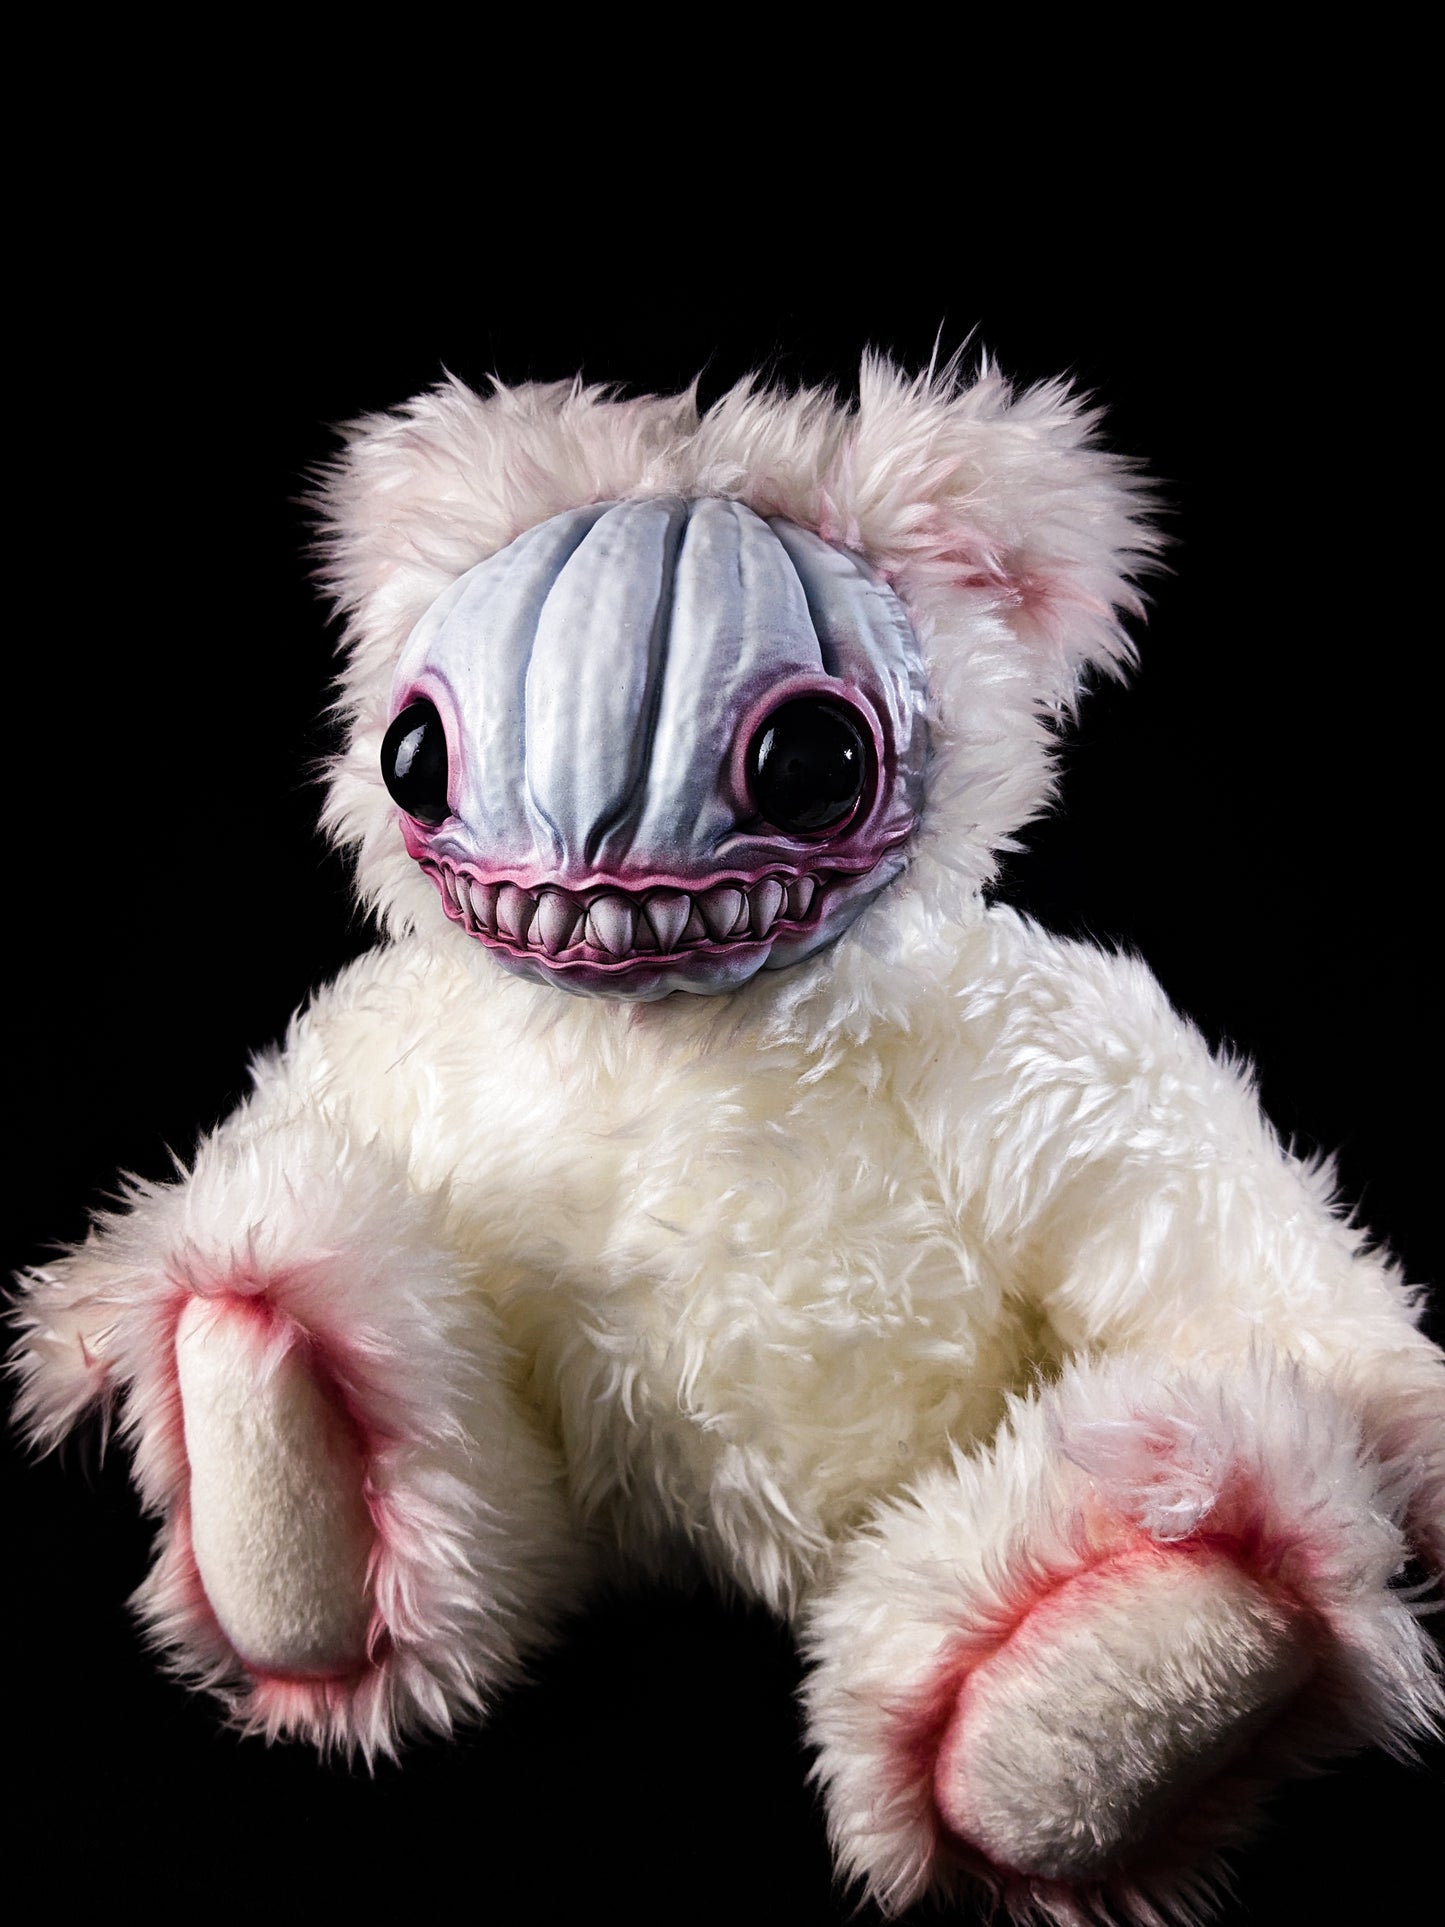 Drained Dweller: HAUNTVESTER - CRYPTCRITZ Handcrafted Creepy Cute Halloween Pumpkin Art Doll Plush Toy for Spooky Souls